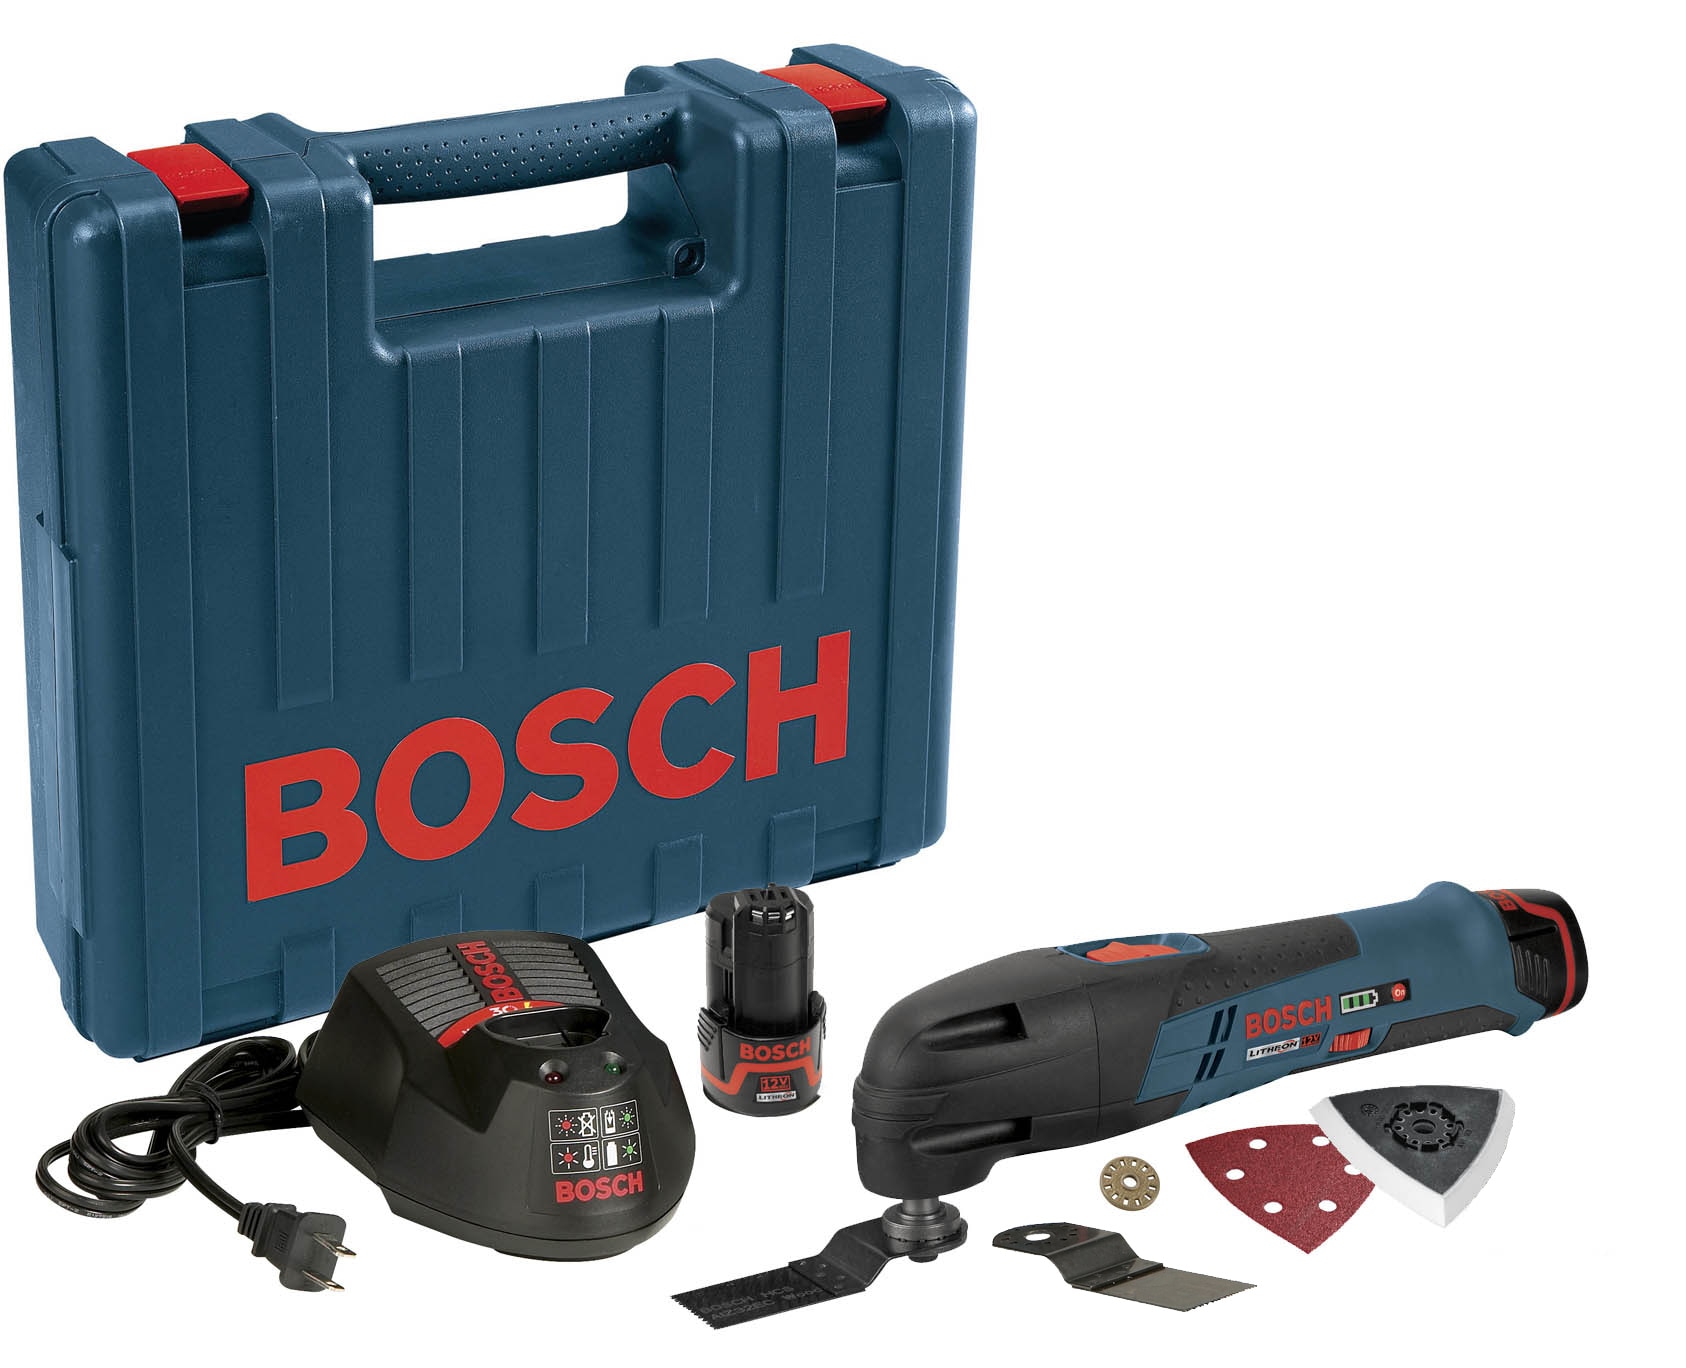 Bosch GOP 10.8V LI Cordless Multi Tool - Product Overview 